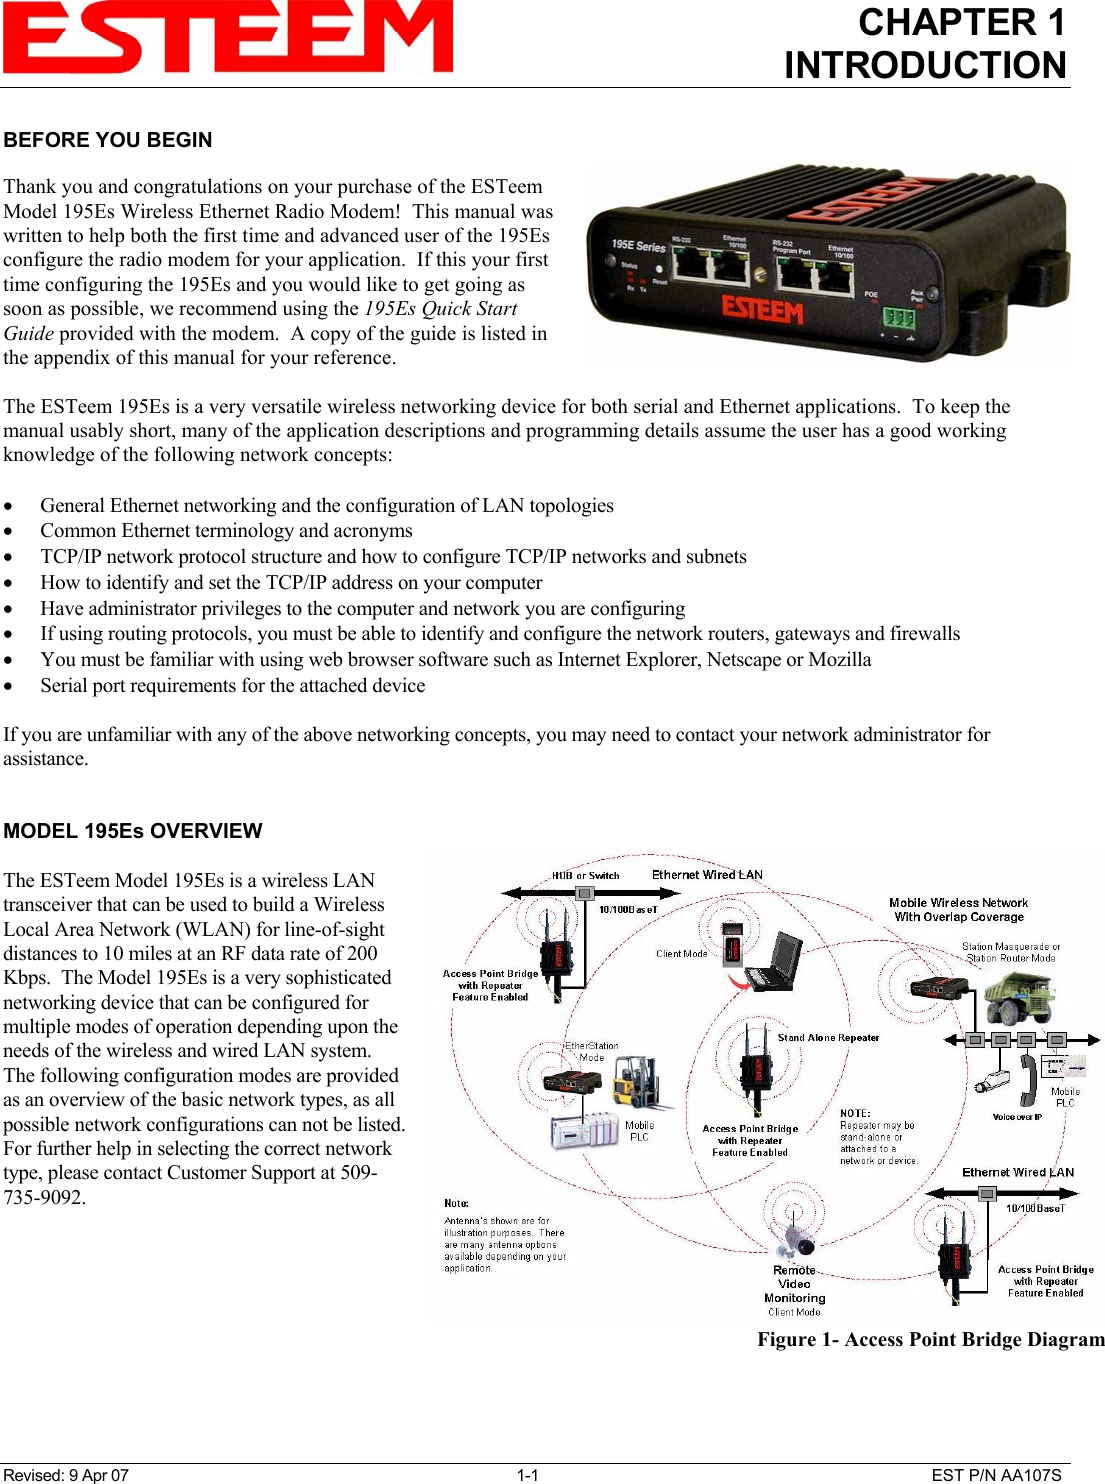 CHAPTER 1INTRODUCTIONRevised: 9 Apr 07 1-1 EST P/N AA107SBEFORE YOU BEGINThank you and congratulations on your purchase of the ESTeemModel 195Es Wireless Ethernet Radio Modem!  This manual waswritten to help both the first time and advanced user of the 195Esconfigure the radio modem for your application.  If this your firsttime configuring the 195Es and you would like to get going assoon as possible, we recommend using the 195Es Quick StartGuide provided with the modem.  A copy of the guide is listed inthe appendix of this manual for your reference.The ESTeem 195Es is a very versatile wireless networking device for both serial and Ethernet applications.  To keep themanual usably short, many of the application descriptions and programming details assume the user has a good workingknowledge of the following network concepts:• General Ethernet networking and the configuration of LAN topologies• Common Ethernet terminology and acronyms• TCP/IP network protocol structure and how to configure TCP/IP networks and subnets• How to identify and set the TCP/IP address on your computer• Have administrator privileges to the computer and network you are configuring• If using routing protocols, you must be able to identify and configure the network routers, gateways and firewalls• You must be familiar with using web browser software such as Internet Explorer, Netscape or Mozilla• Serial port requirements for the attached deviceIf you are unfamiliar with any of the above networking concepts, you may need to contact your network administrator forassistance.MODEL 195Es OVERVIEWThe ESTeem Model 195Es is a wireless LANtransceiver that can be used to build a WirelessLocal Area Network (WLAN) for line-of-sightdistances to 10 miles at an RF data rate of 200Kbps.  The Model 195Es is a very sophisticatednetworking device that can be configured formultiple modes of operation depending upon theneeds of the wireless and wired LAN system. The following configuration modes are providedas an overview of the basic network types, as allpossible network configurations can not be listed.For further help in selecting the correct networktype, please contact Customer Support at 509-735-9092.Figure 1- Access Point Bridge Diagram